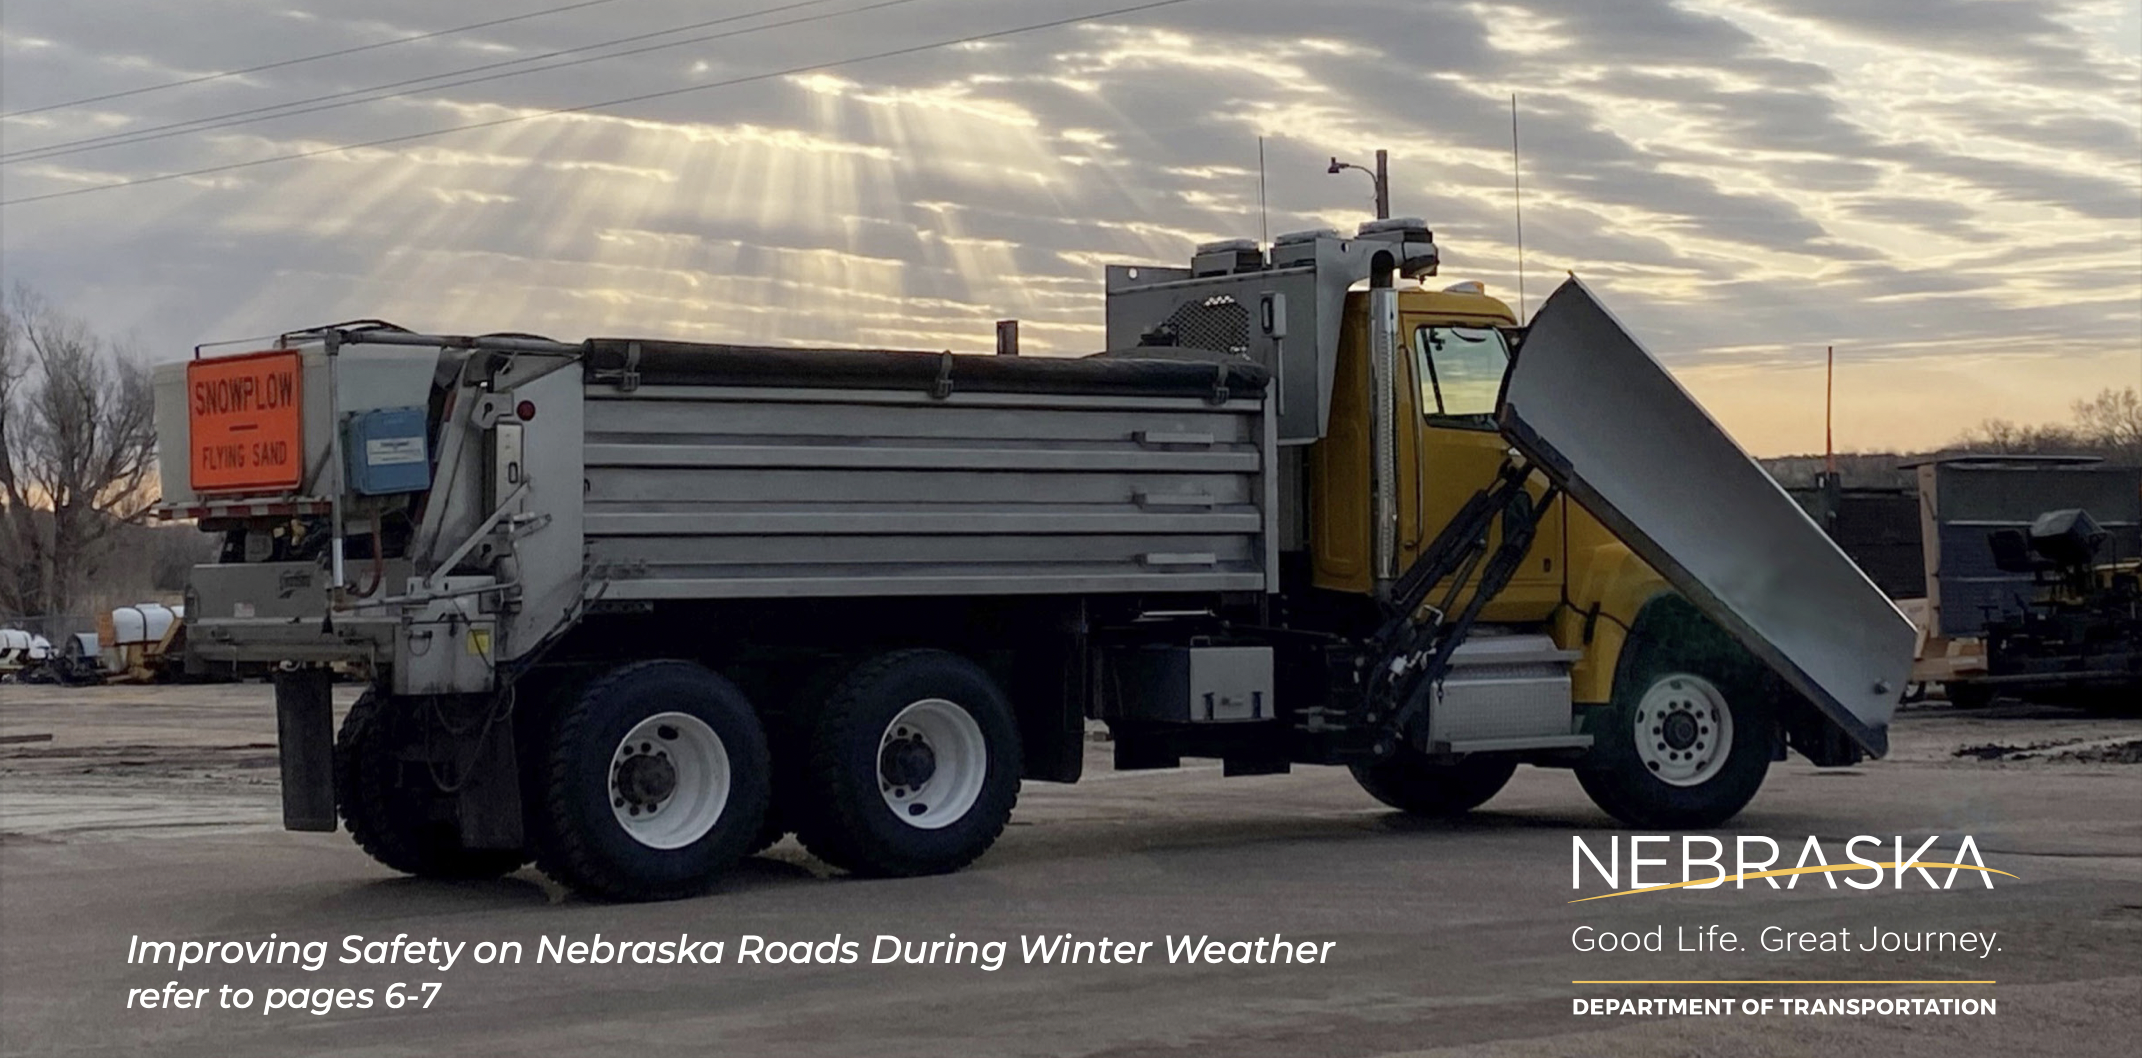 Keeping roads safer during winter weather events is just one of the research areas highlighted in this issue of the Hub.